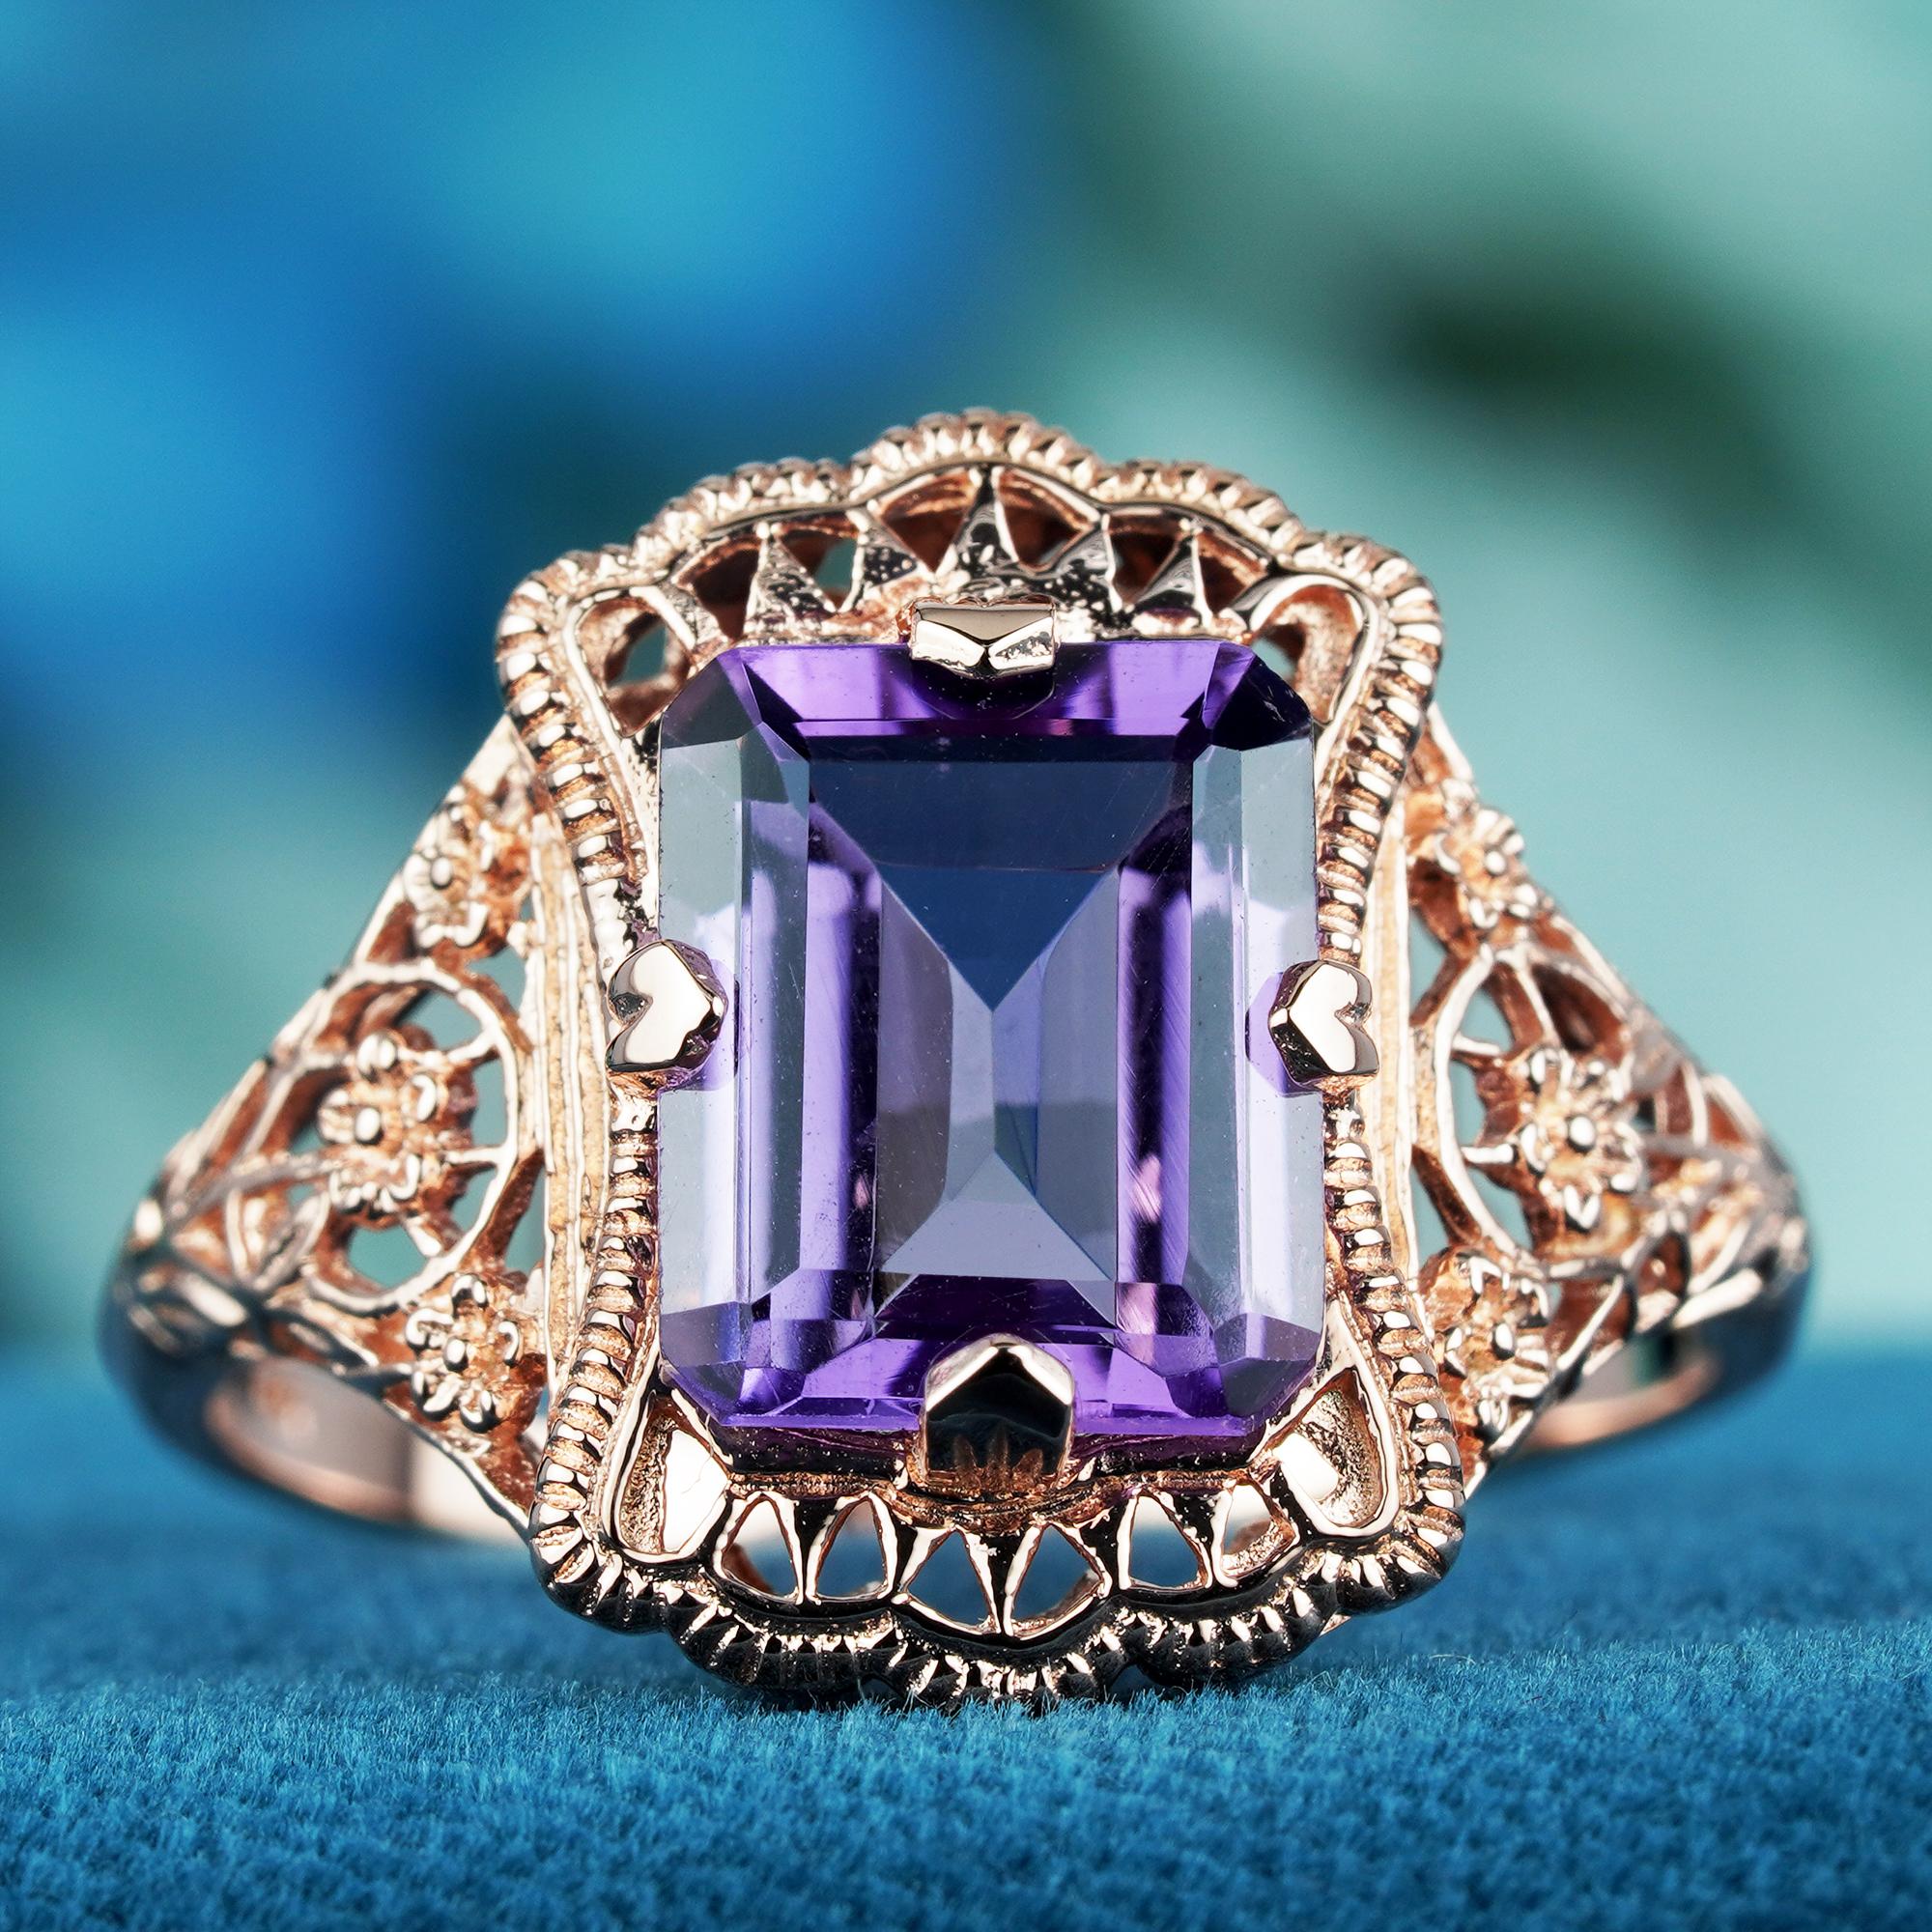 For Sale:  3.5 Ct. Amethyst Vintage Style Filigree Cocktail Ring in Solid 9K Rose Gold 2